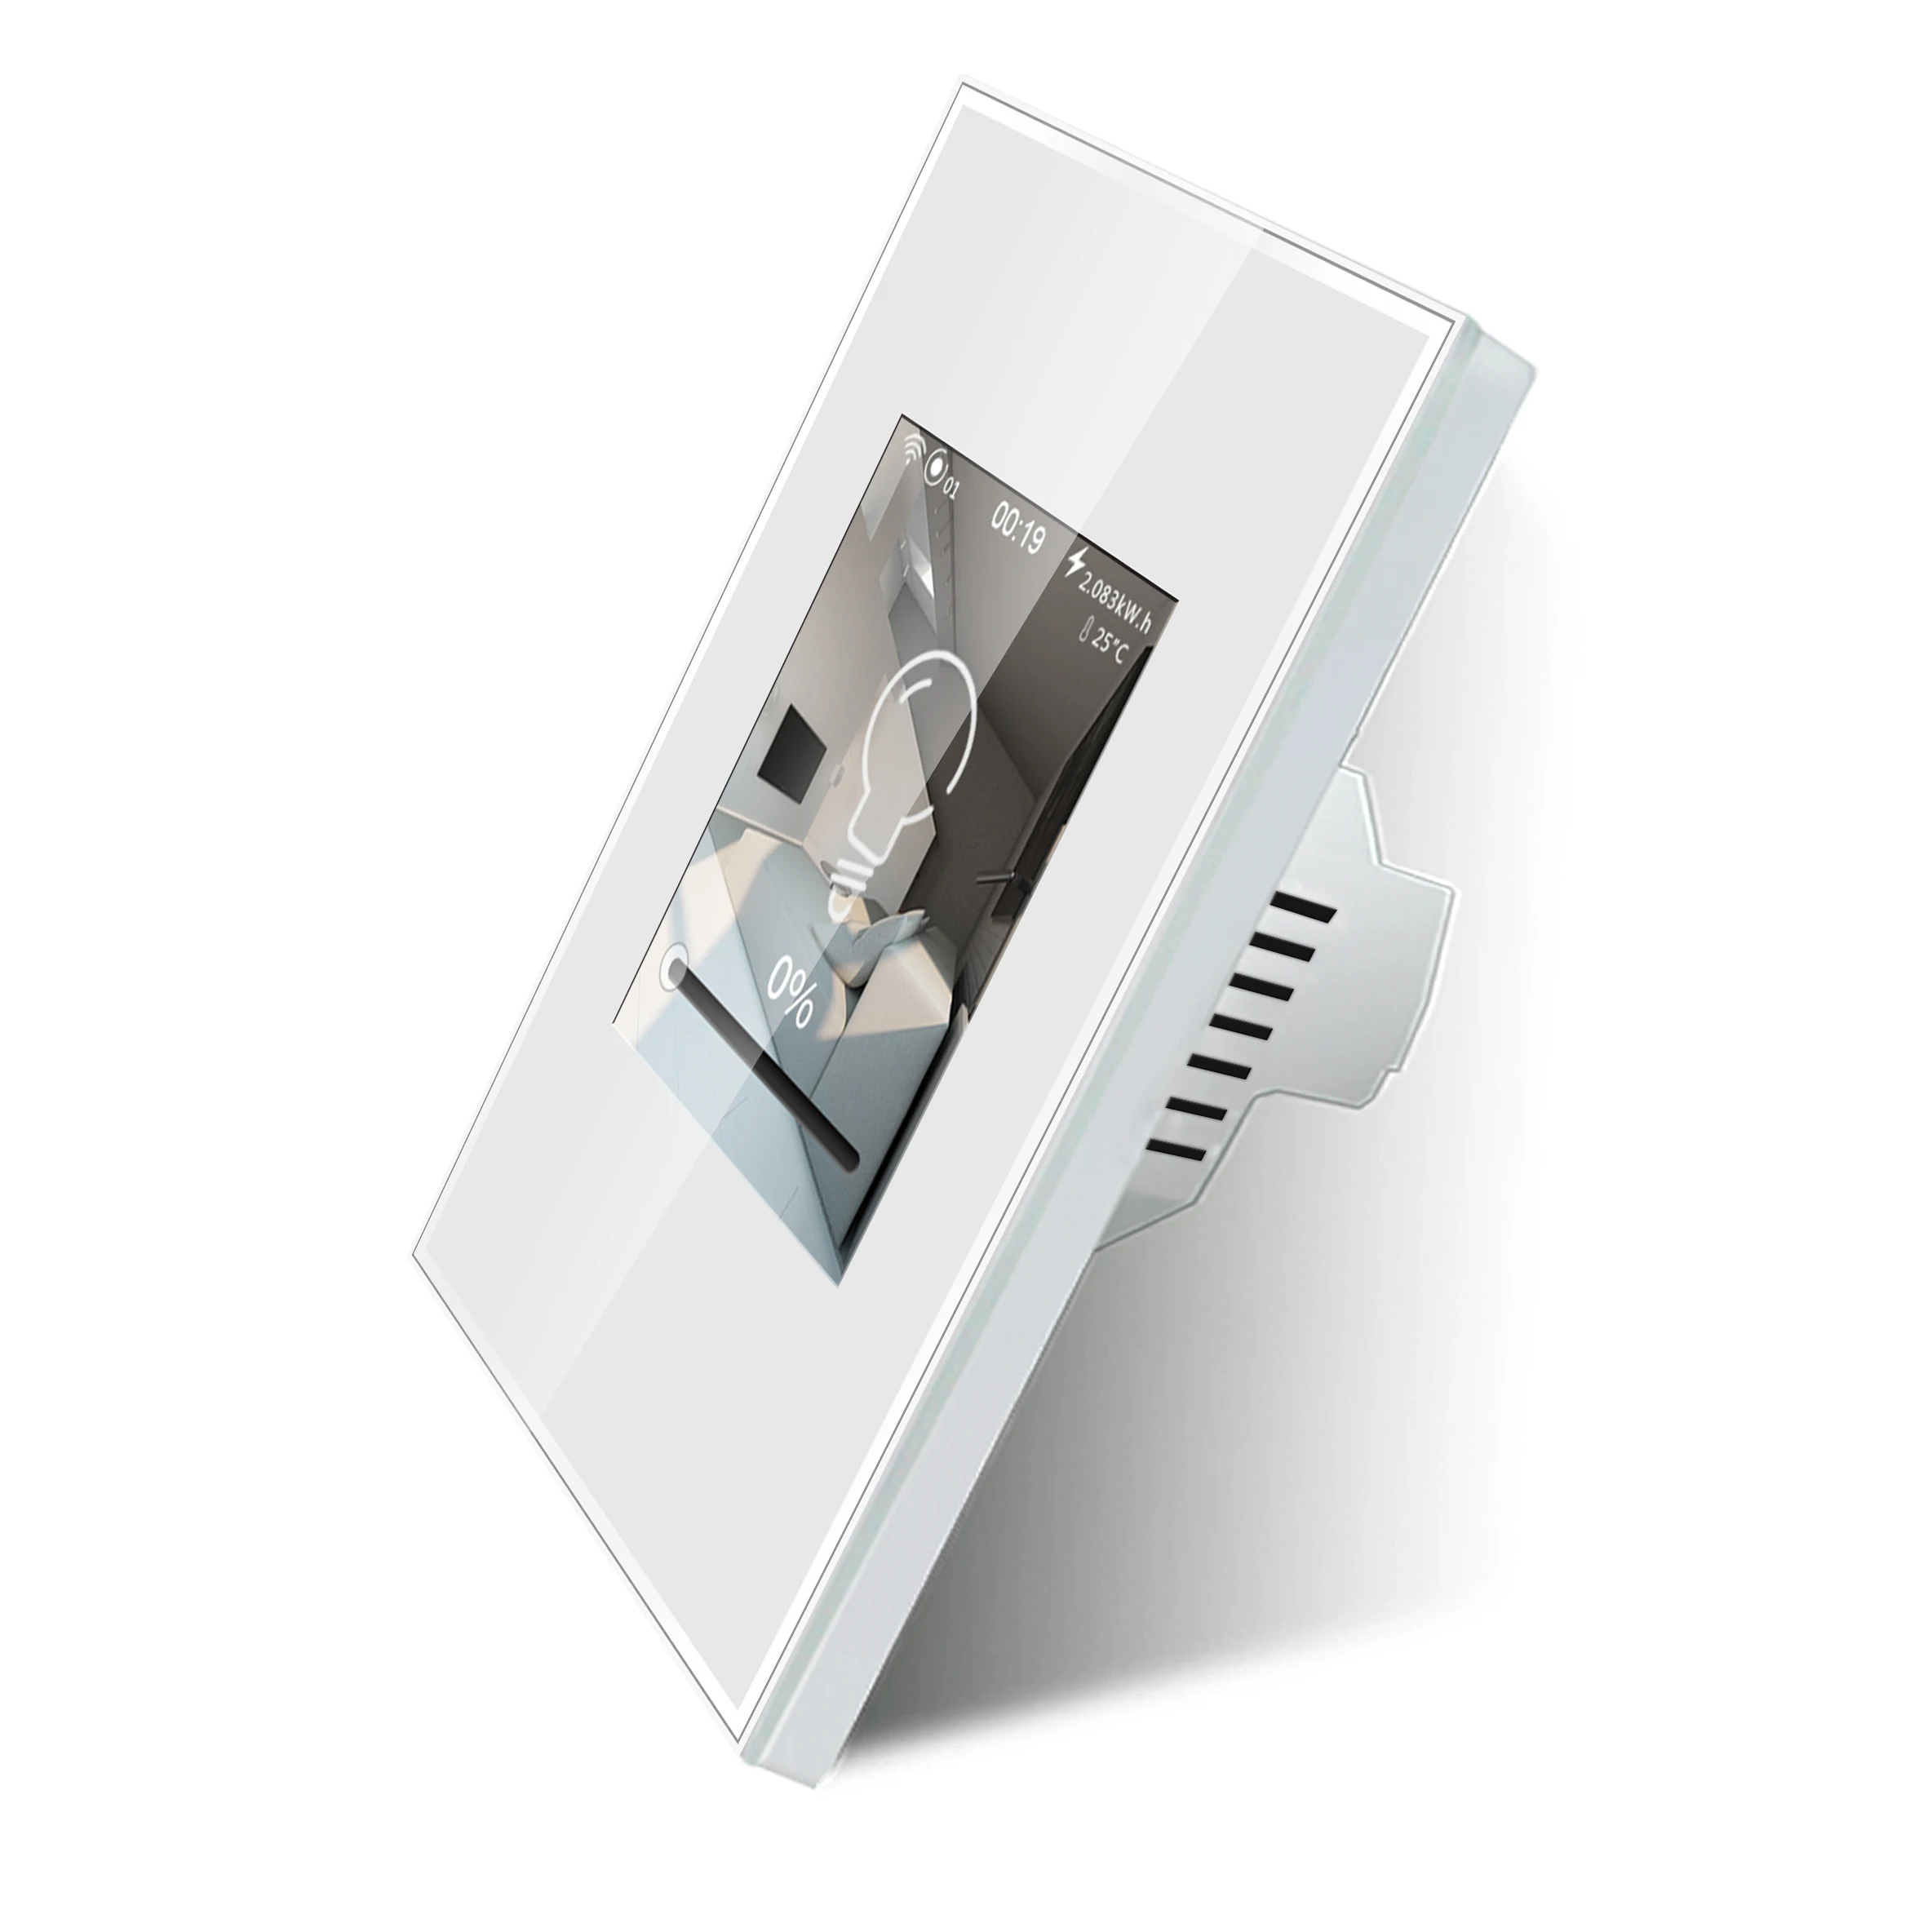 Futuristic design Lanbon L8 1 gang 2 way 3 way wifi led dimmer with power monitoring smart light switch US Italy domotica